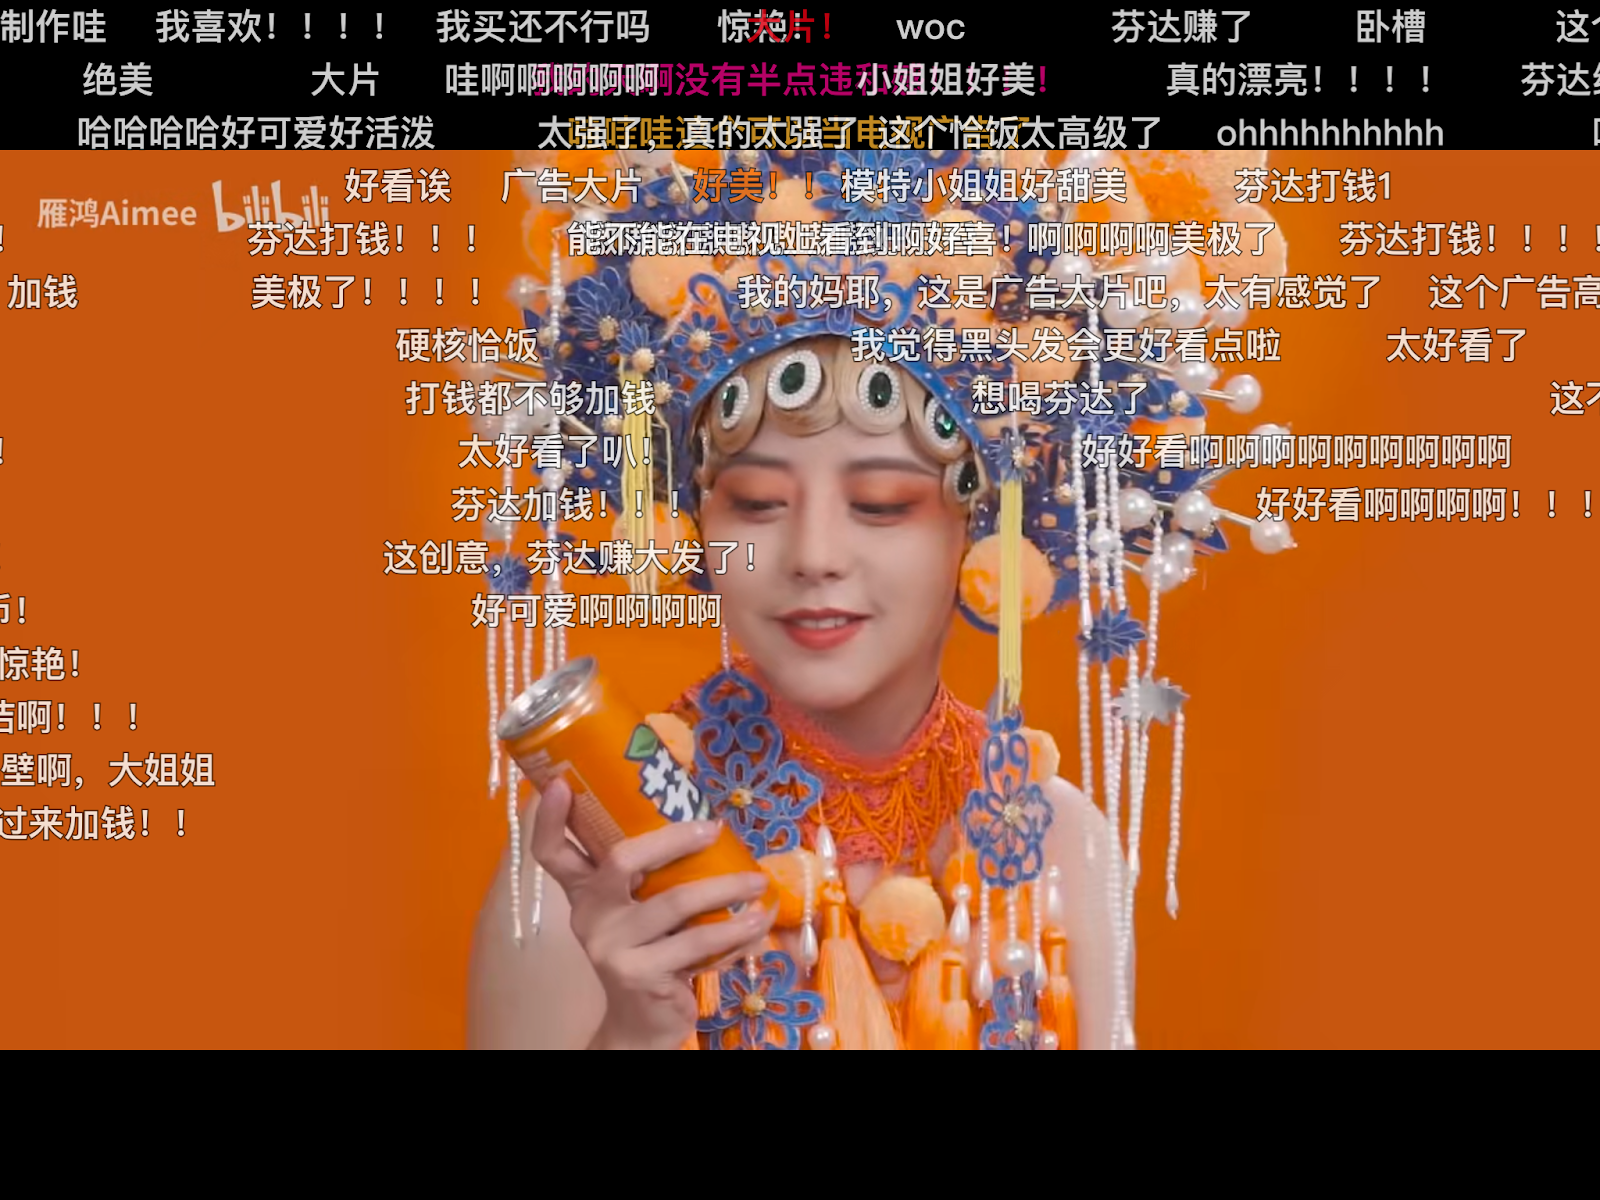 Fanta did KOL marketing with several bloggers who produced a series of creative videos related to the drink on Bilibili